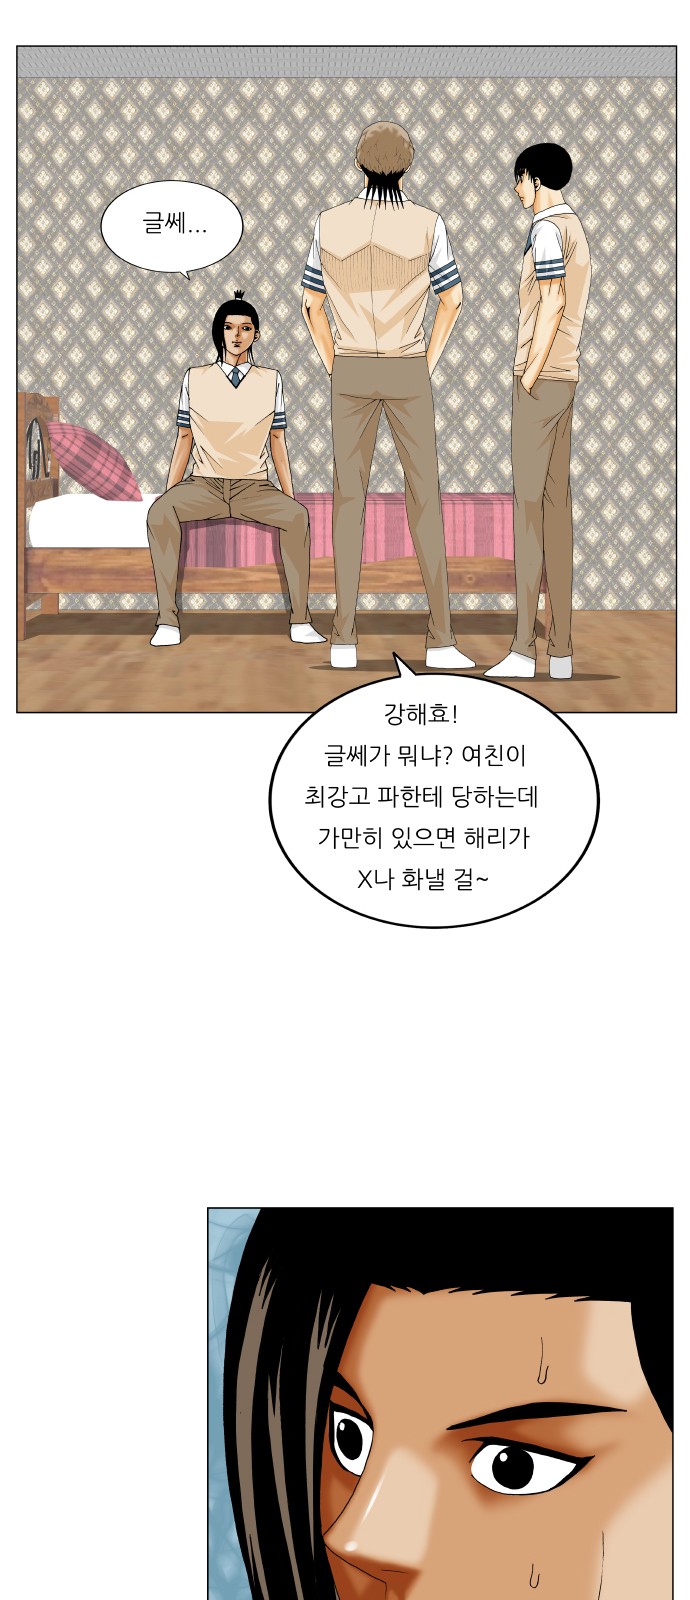 Ultimate Legend - Kang Hae Hyo - Chapter 328 - Page 2